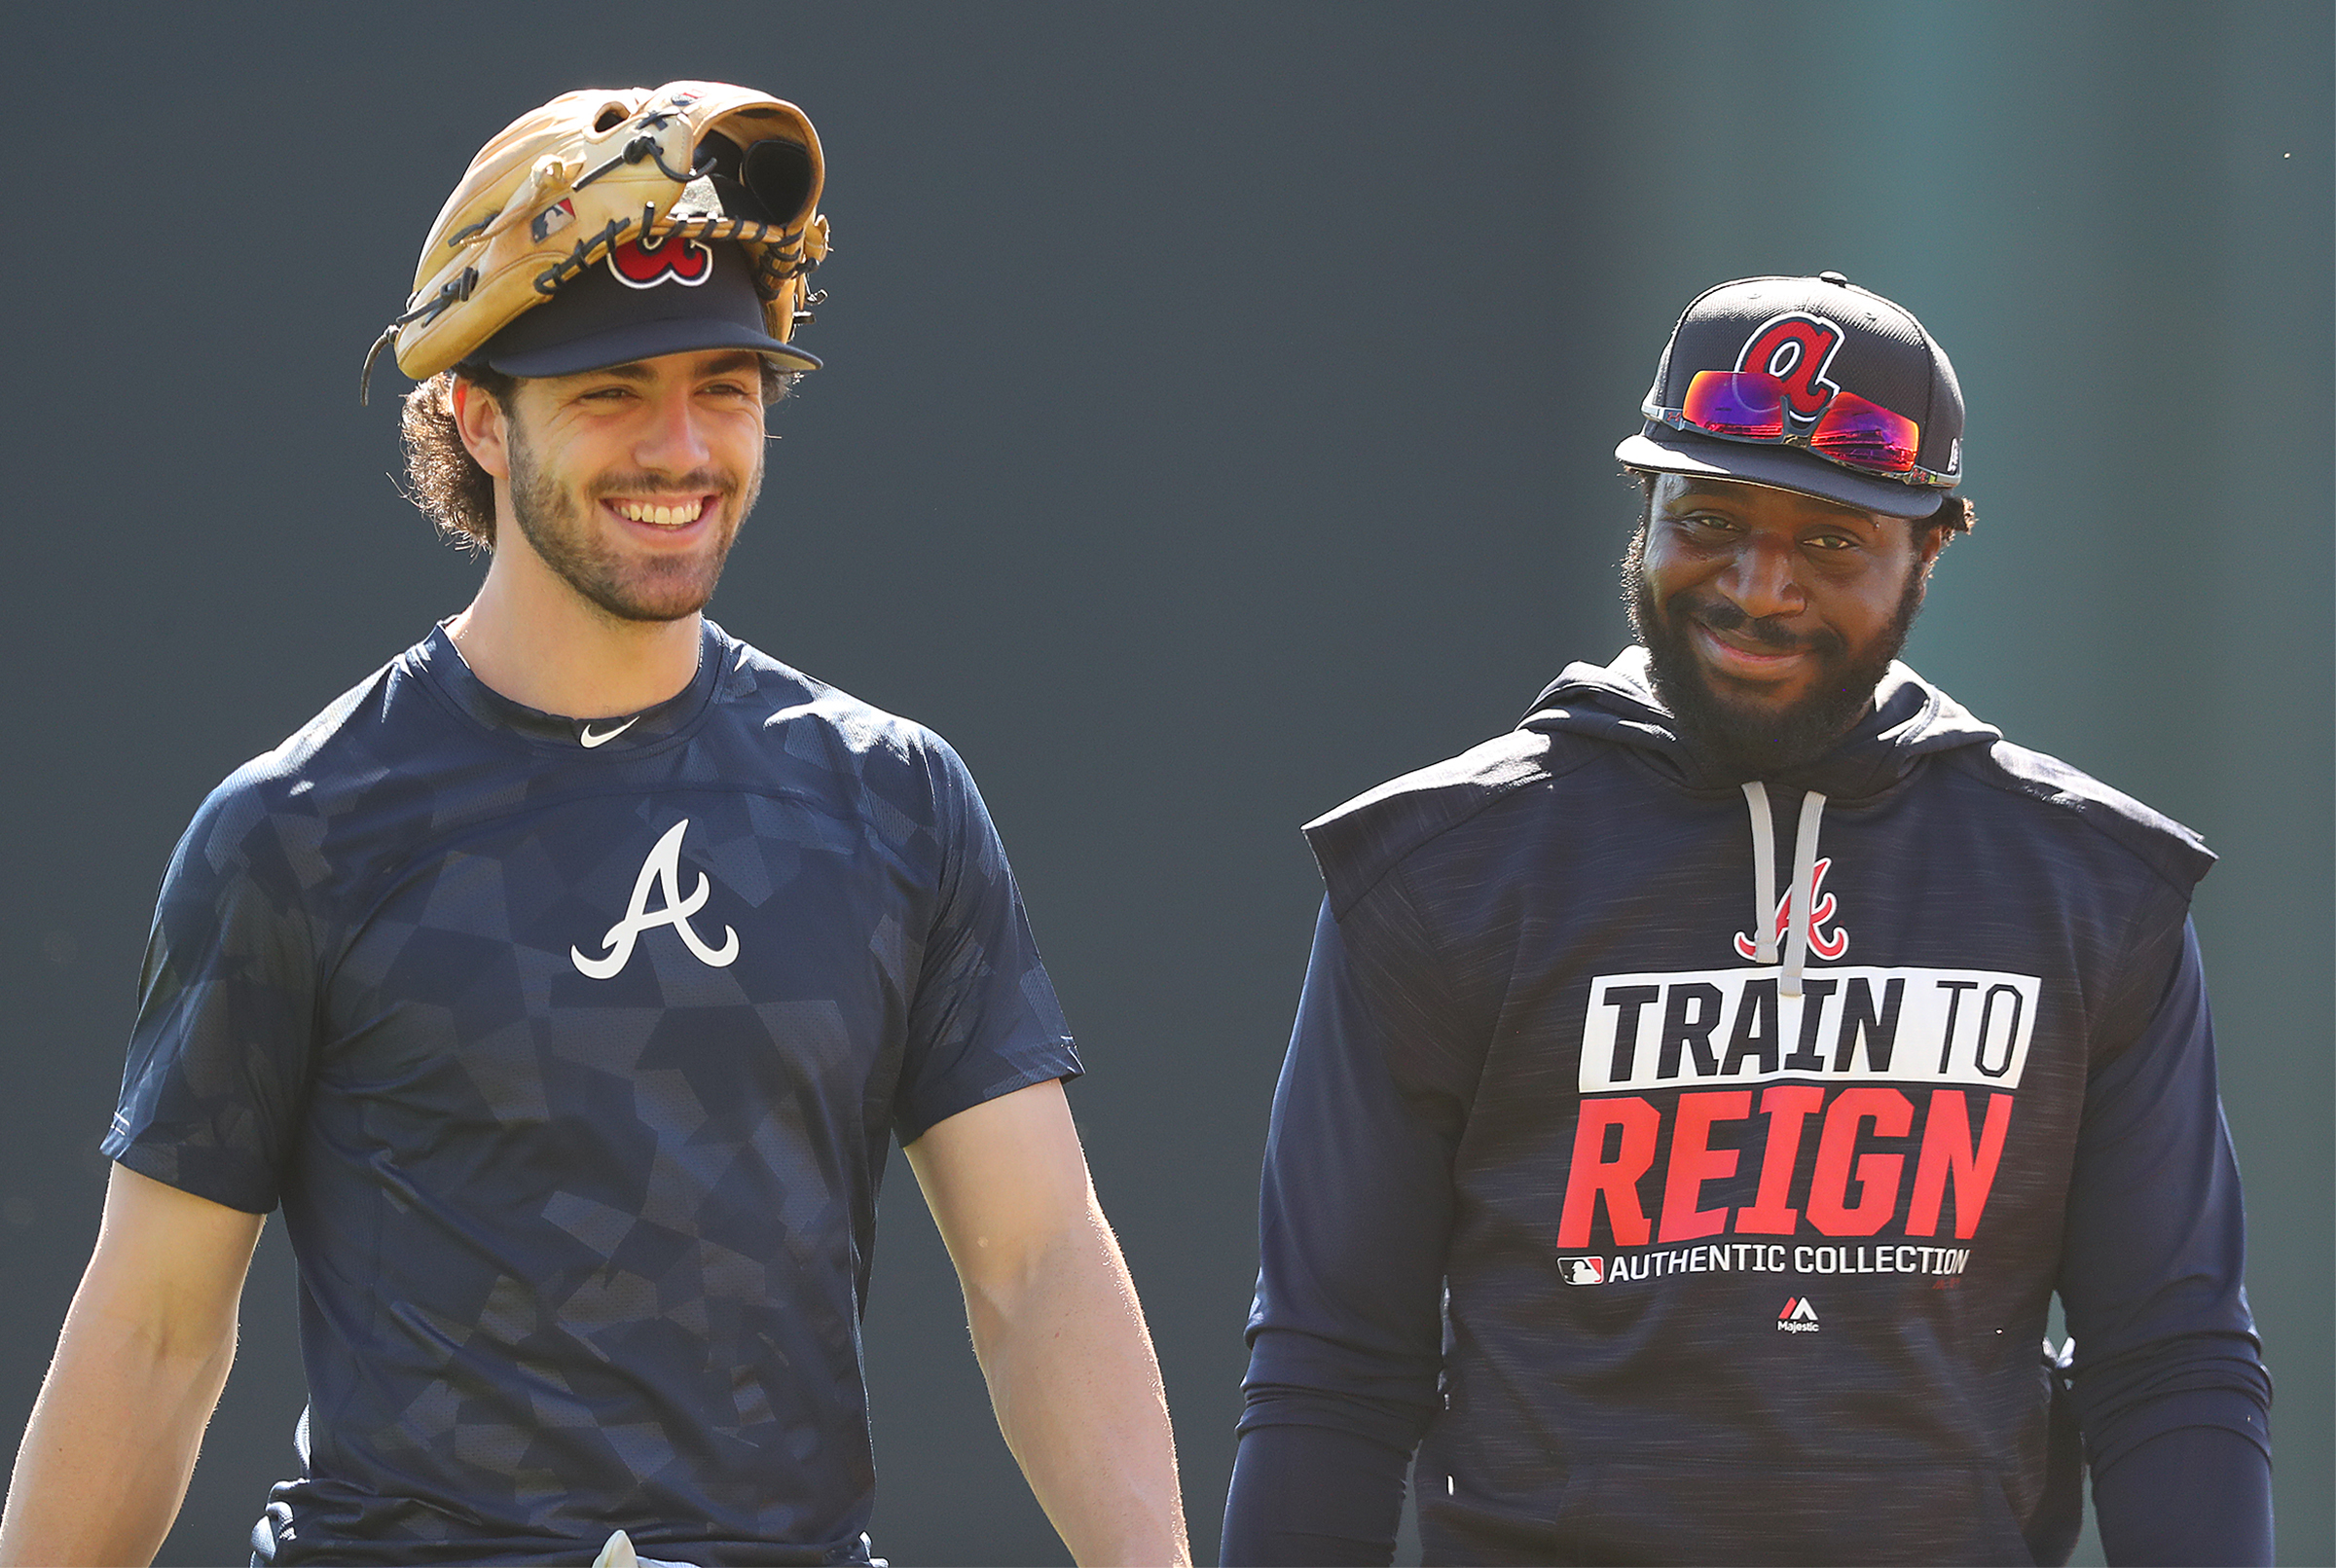 Dansby Swanson exudes leadership potential Braves need